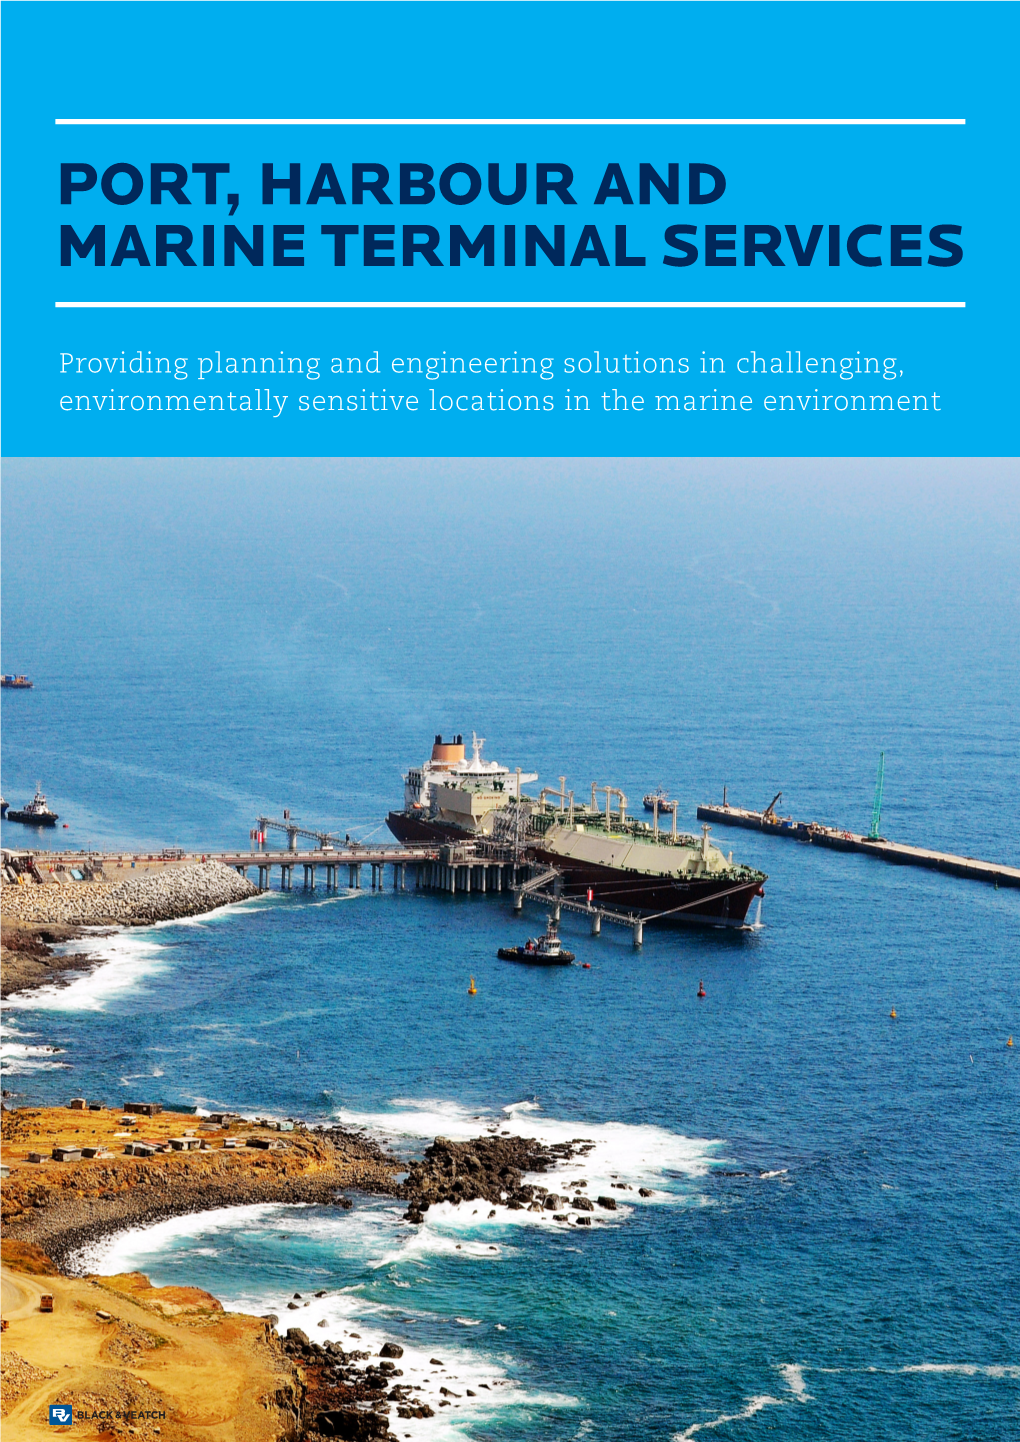 Port, Harbour and Marine Terminal Services